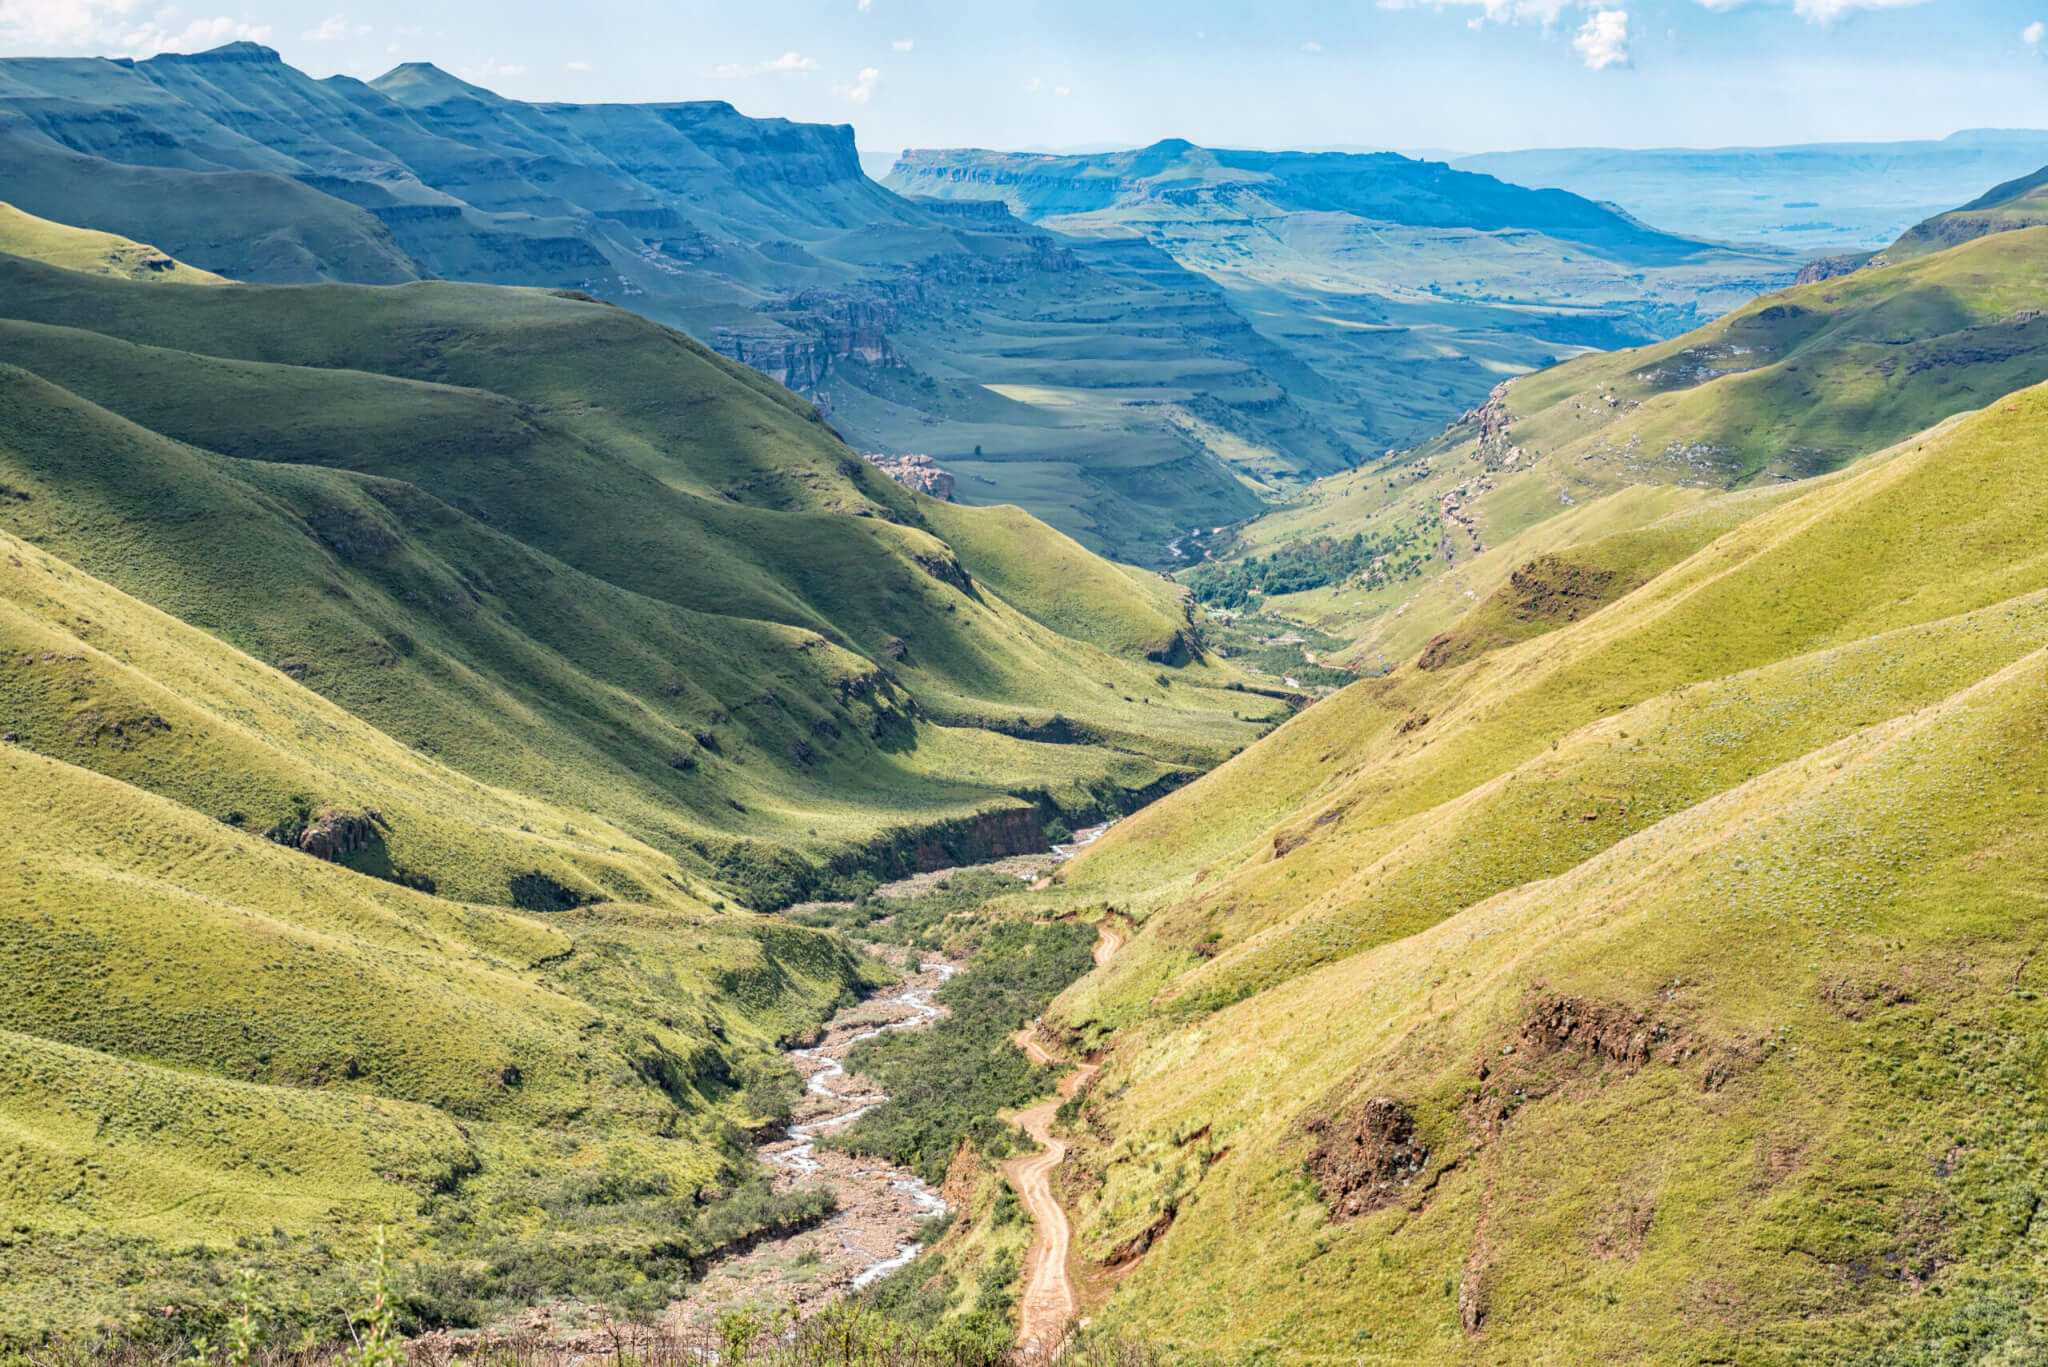 View from Sani Pass back towards South African Border Post